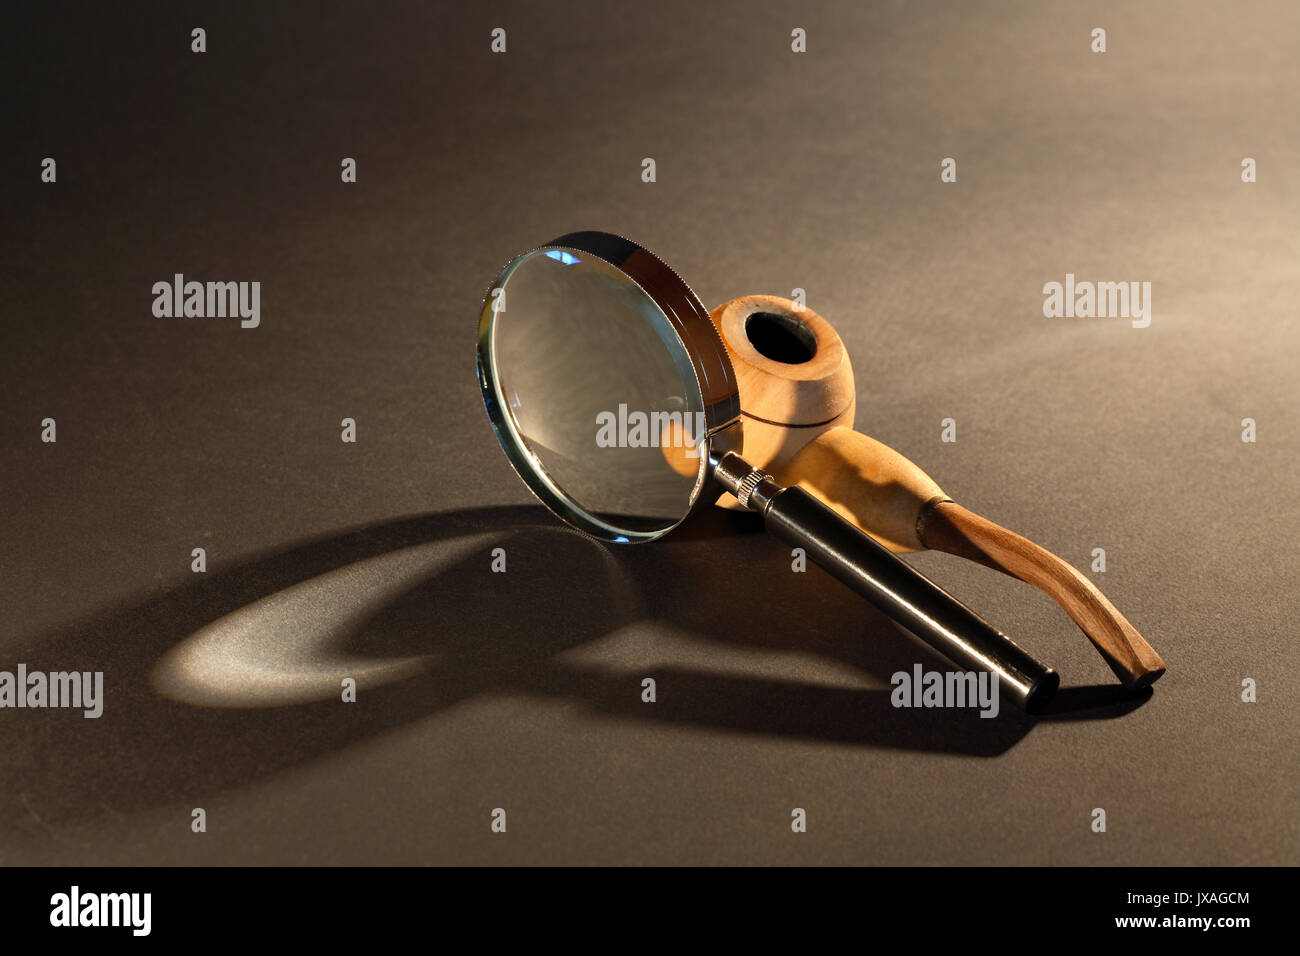 MAGNIFYING GLASS Earrings Spy Detective Research Tinkerer Jewelry